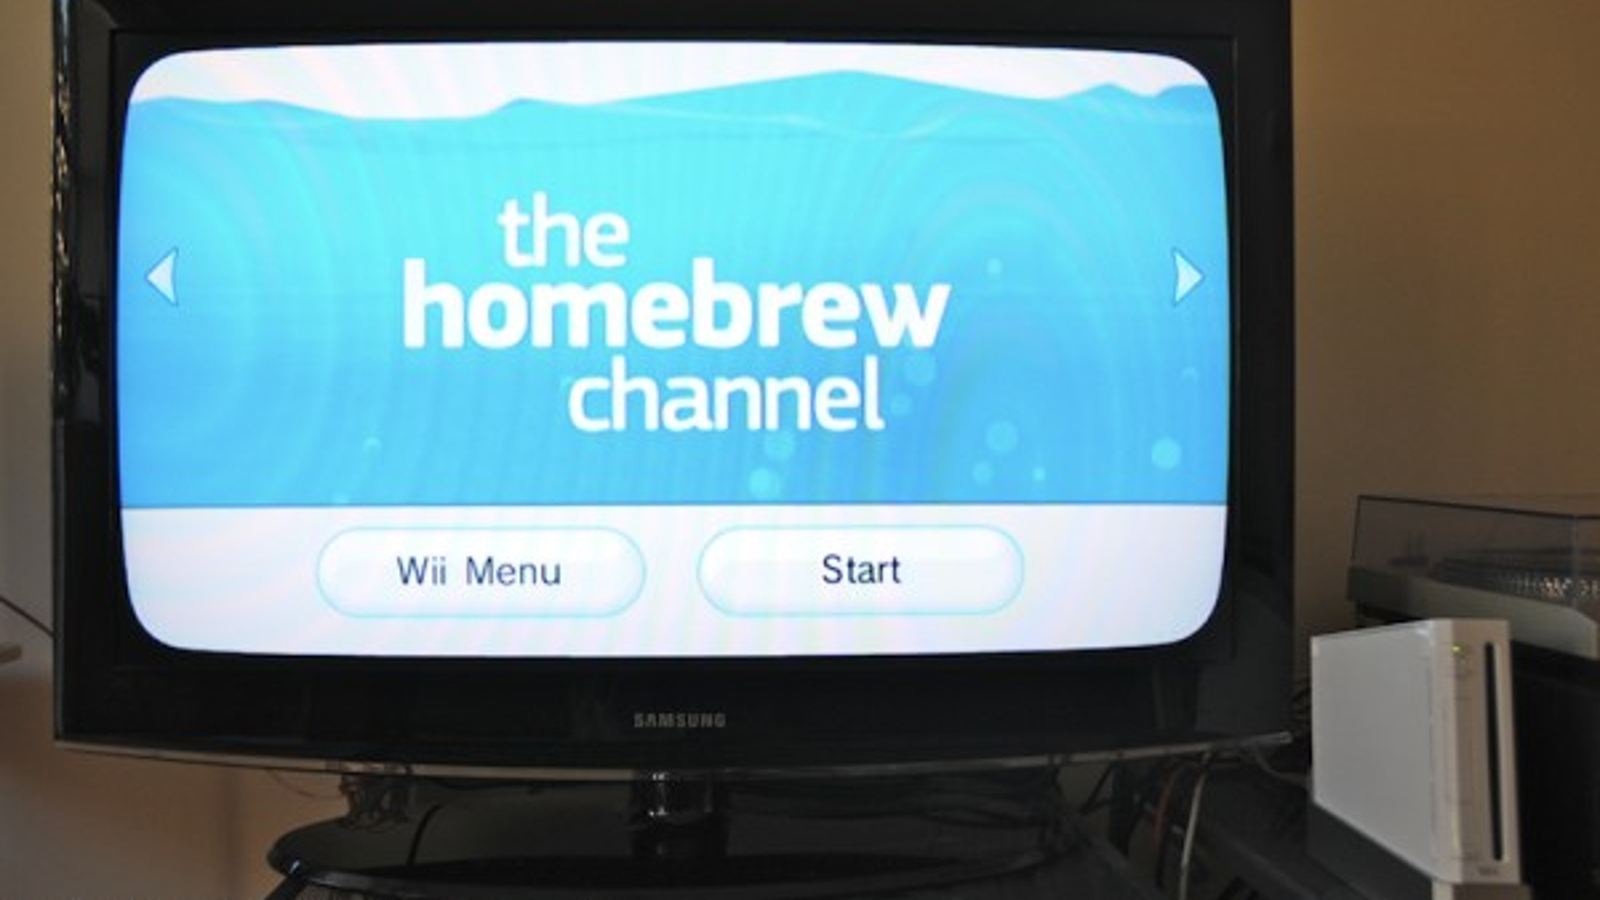 wii apps for homebrew channel